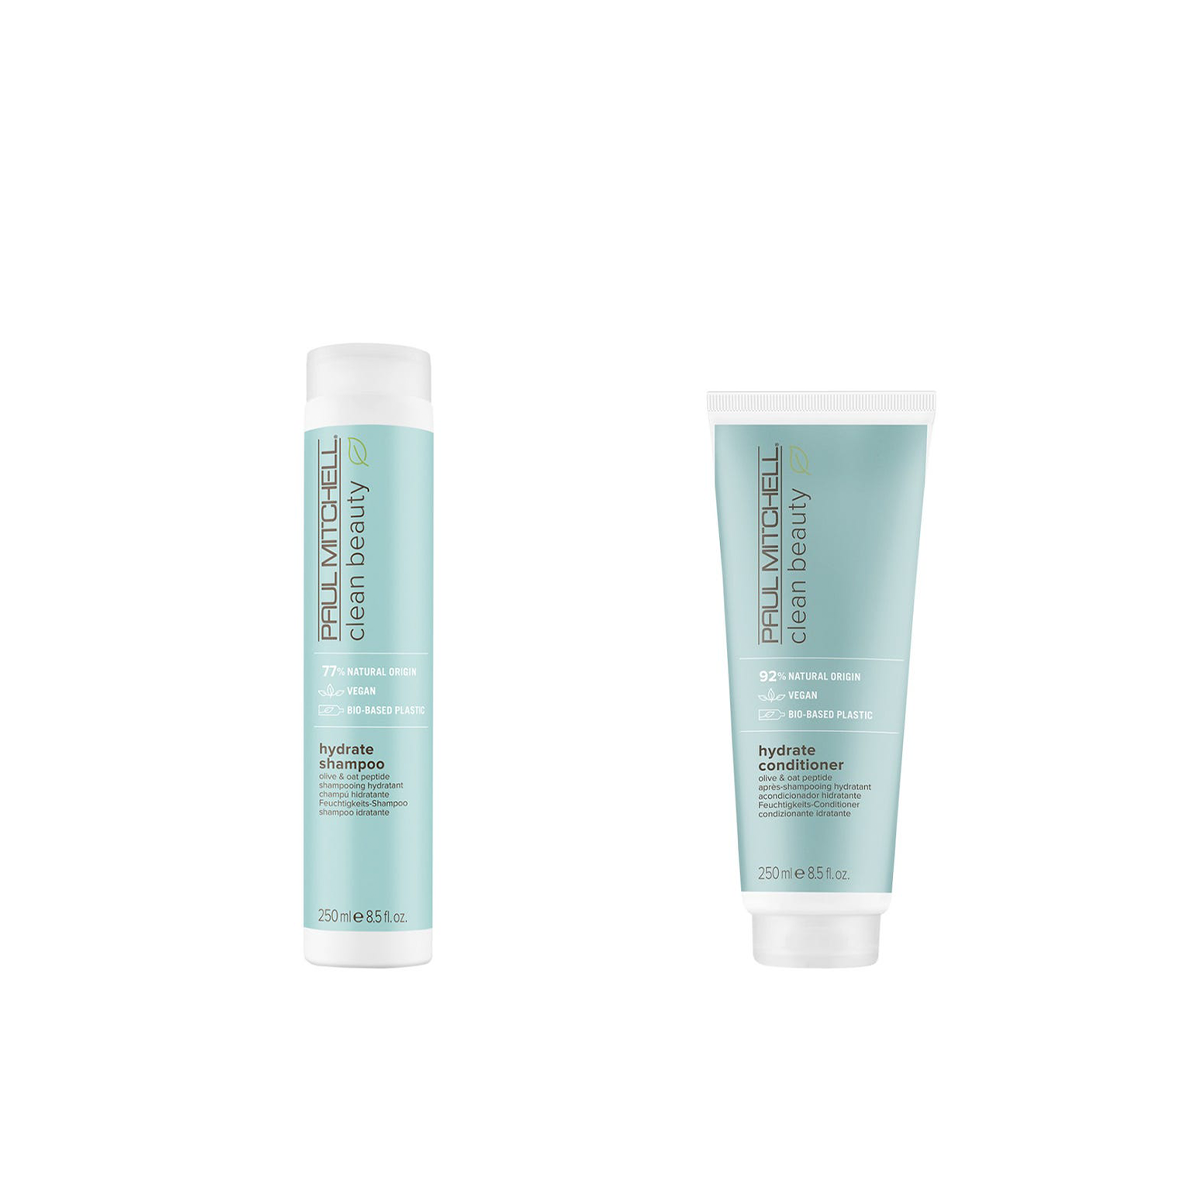 Paul Mitchell Clean Beauty Hydrate Shampoo Conditioner Duo  250ml